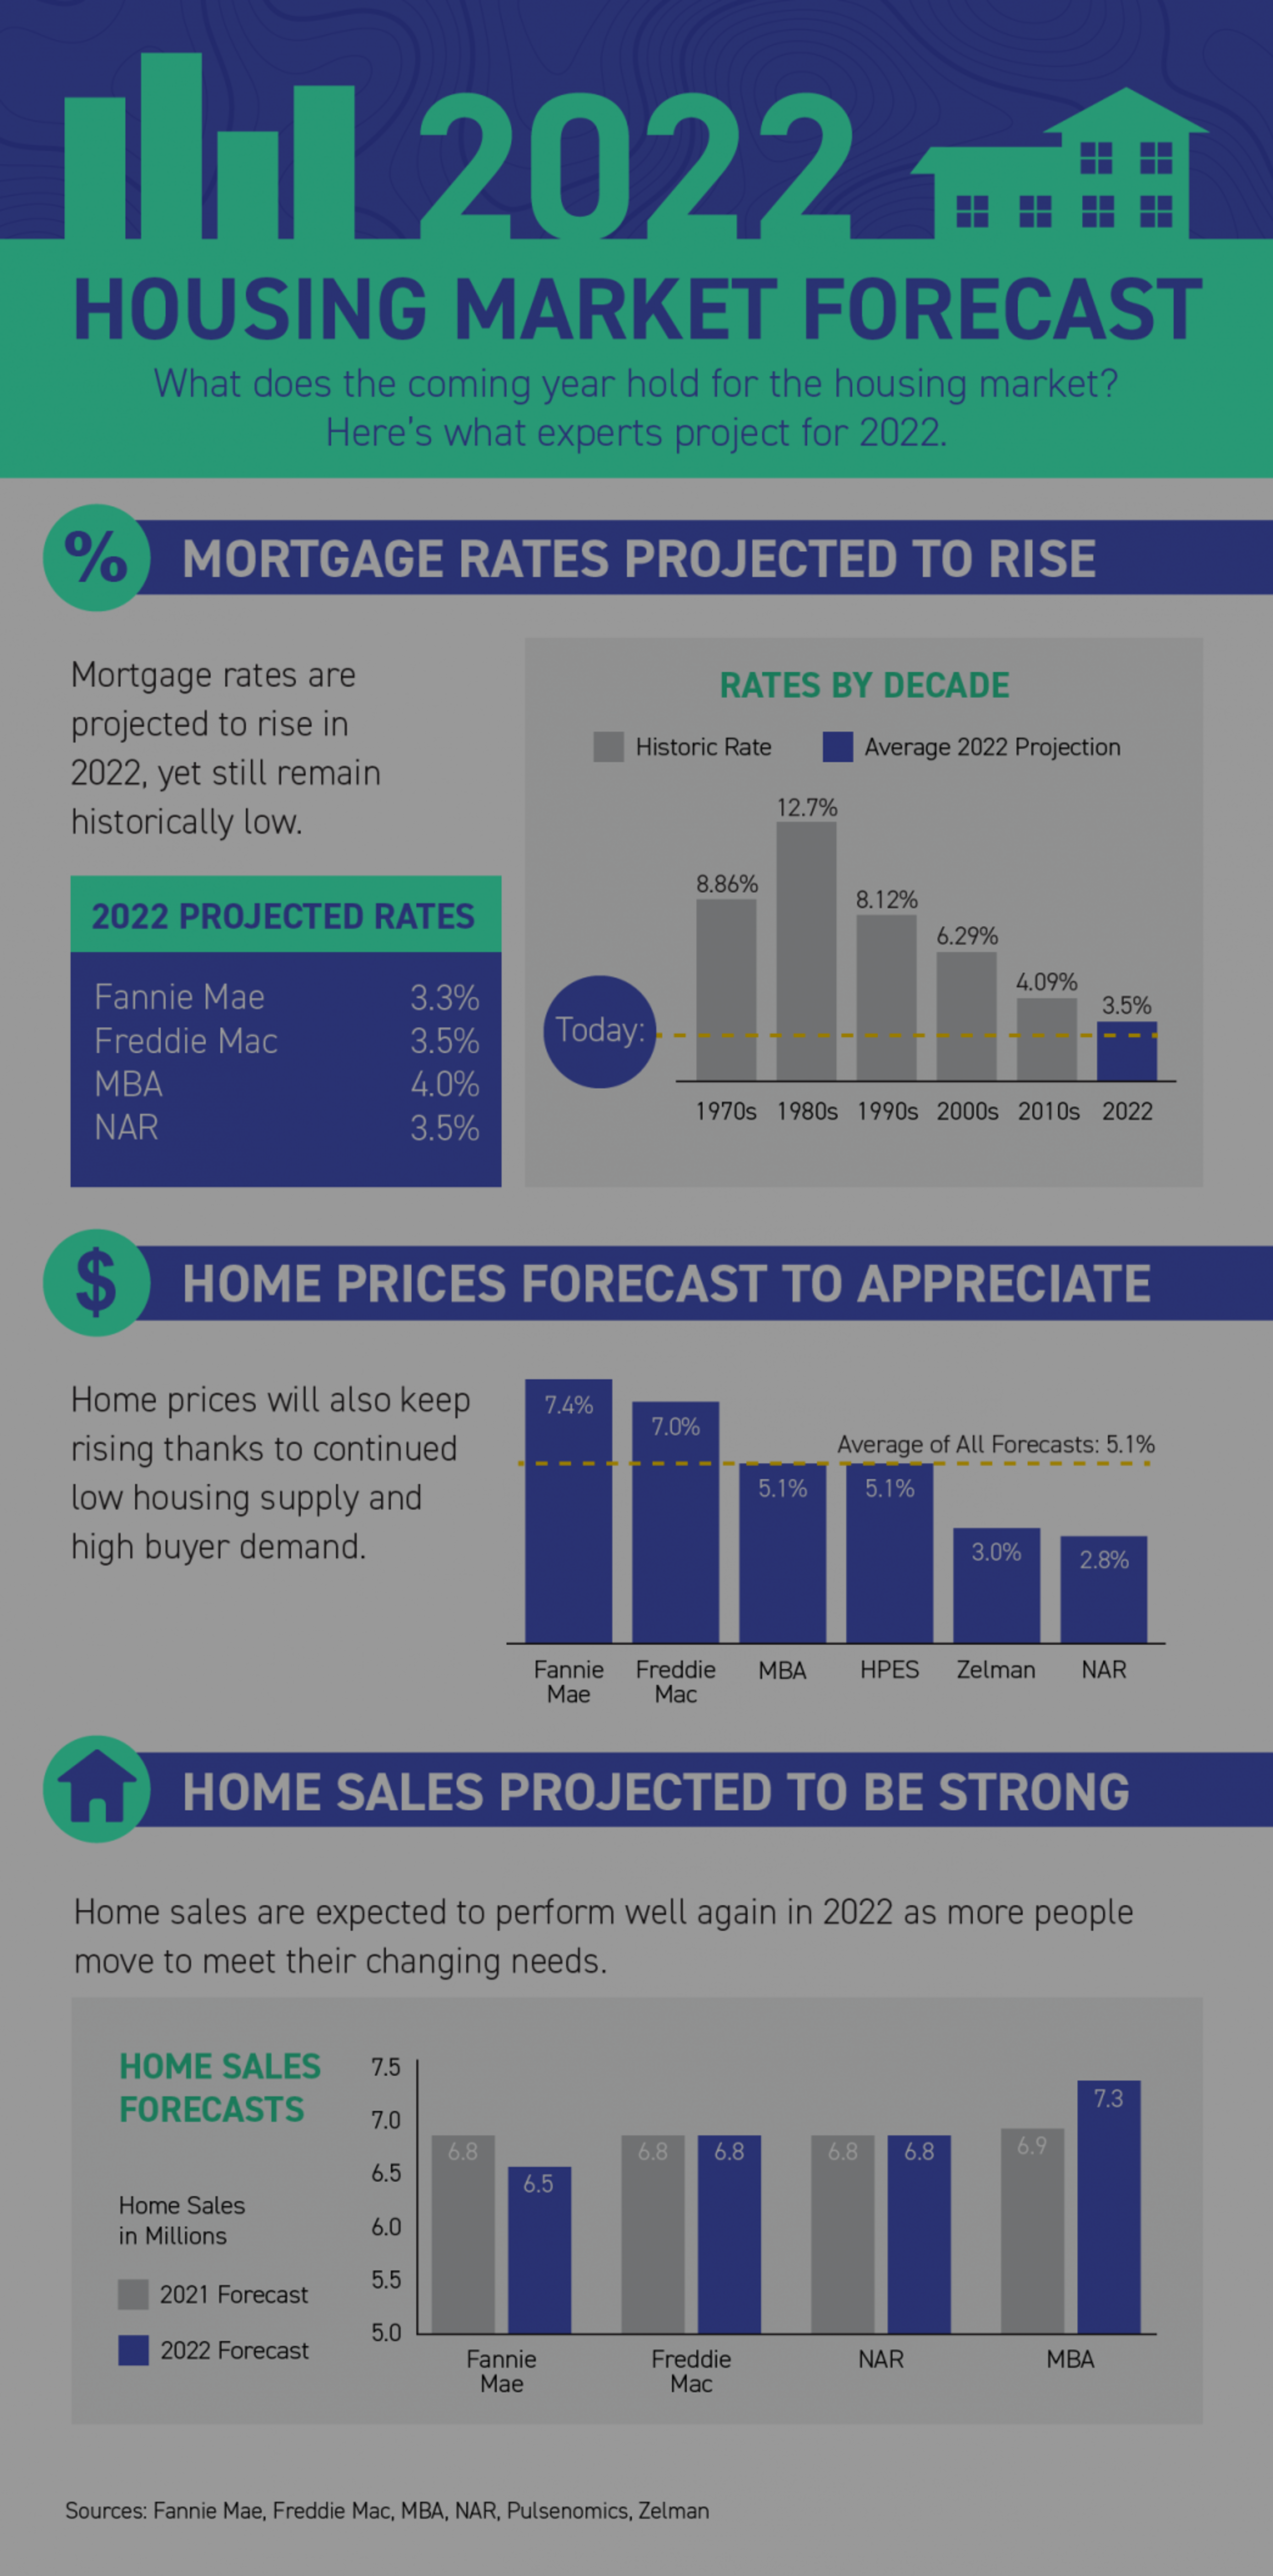 A Brief Look at the 2022 Housing Market